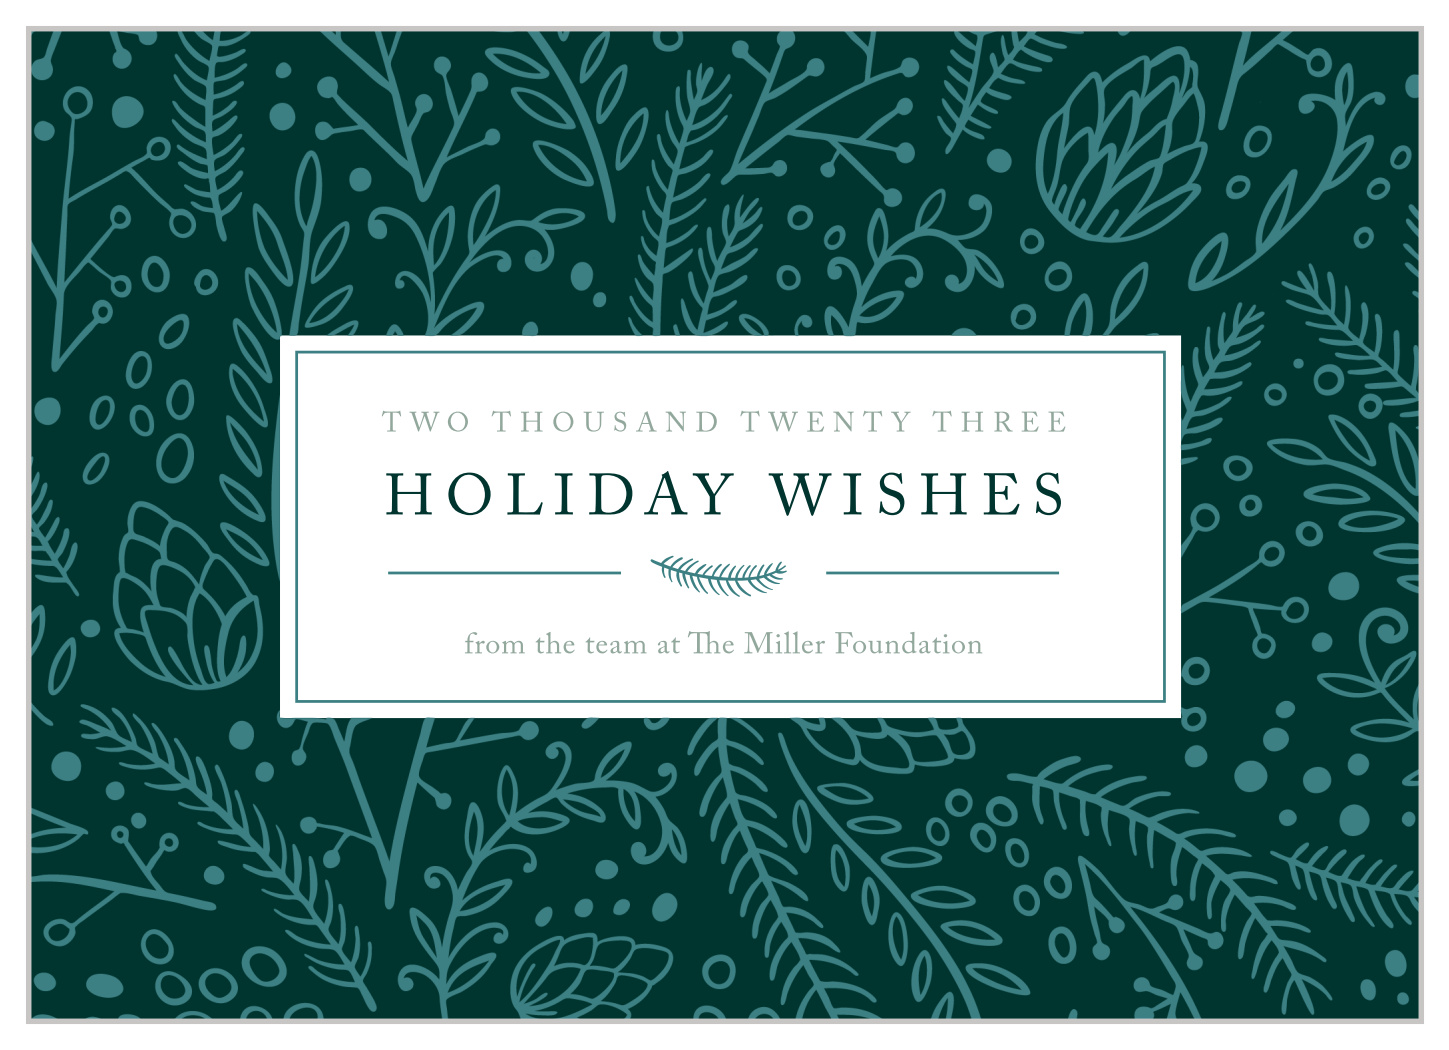 Holiday Greenery Corporate Holiday Cards